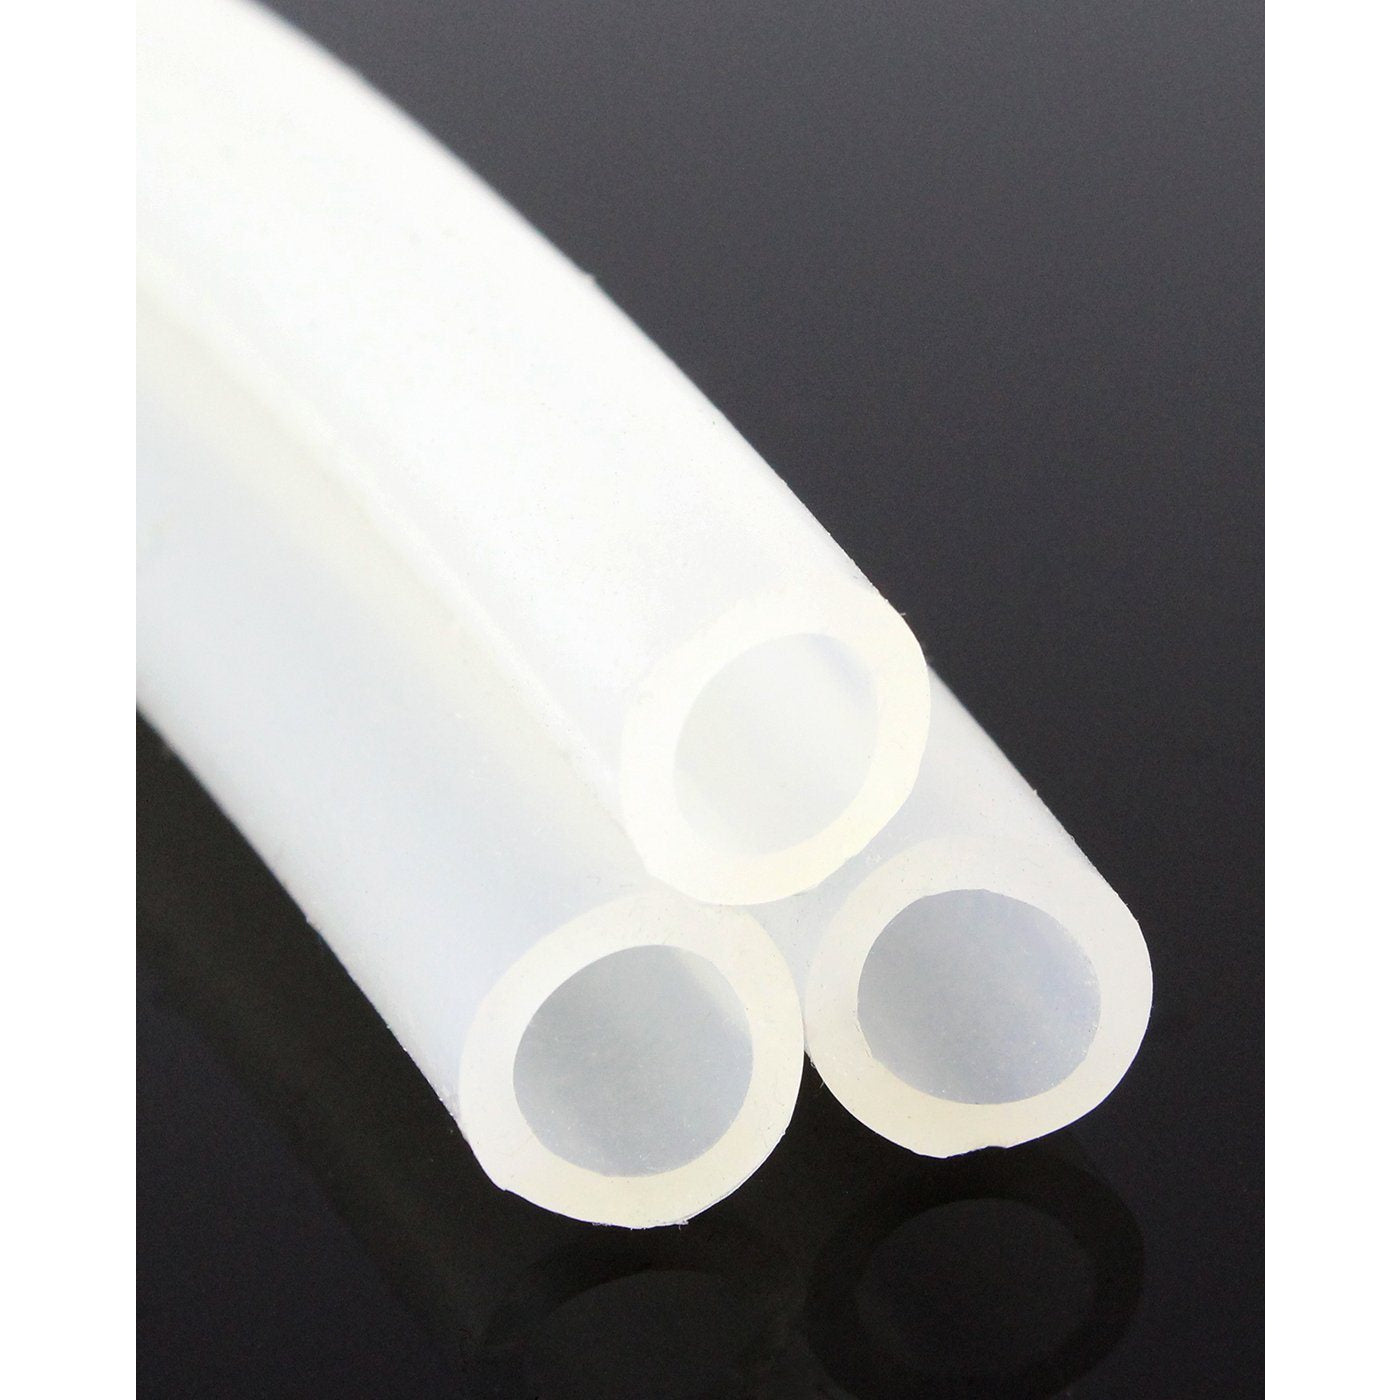 1/4" x 1/8" Wall - Heavy Duty Silicone Tubing For Flow Shop All Categories BVV 5 Feet